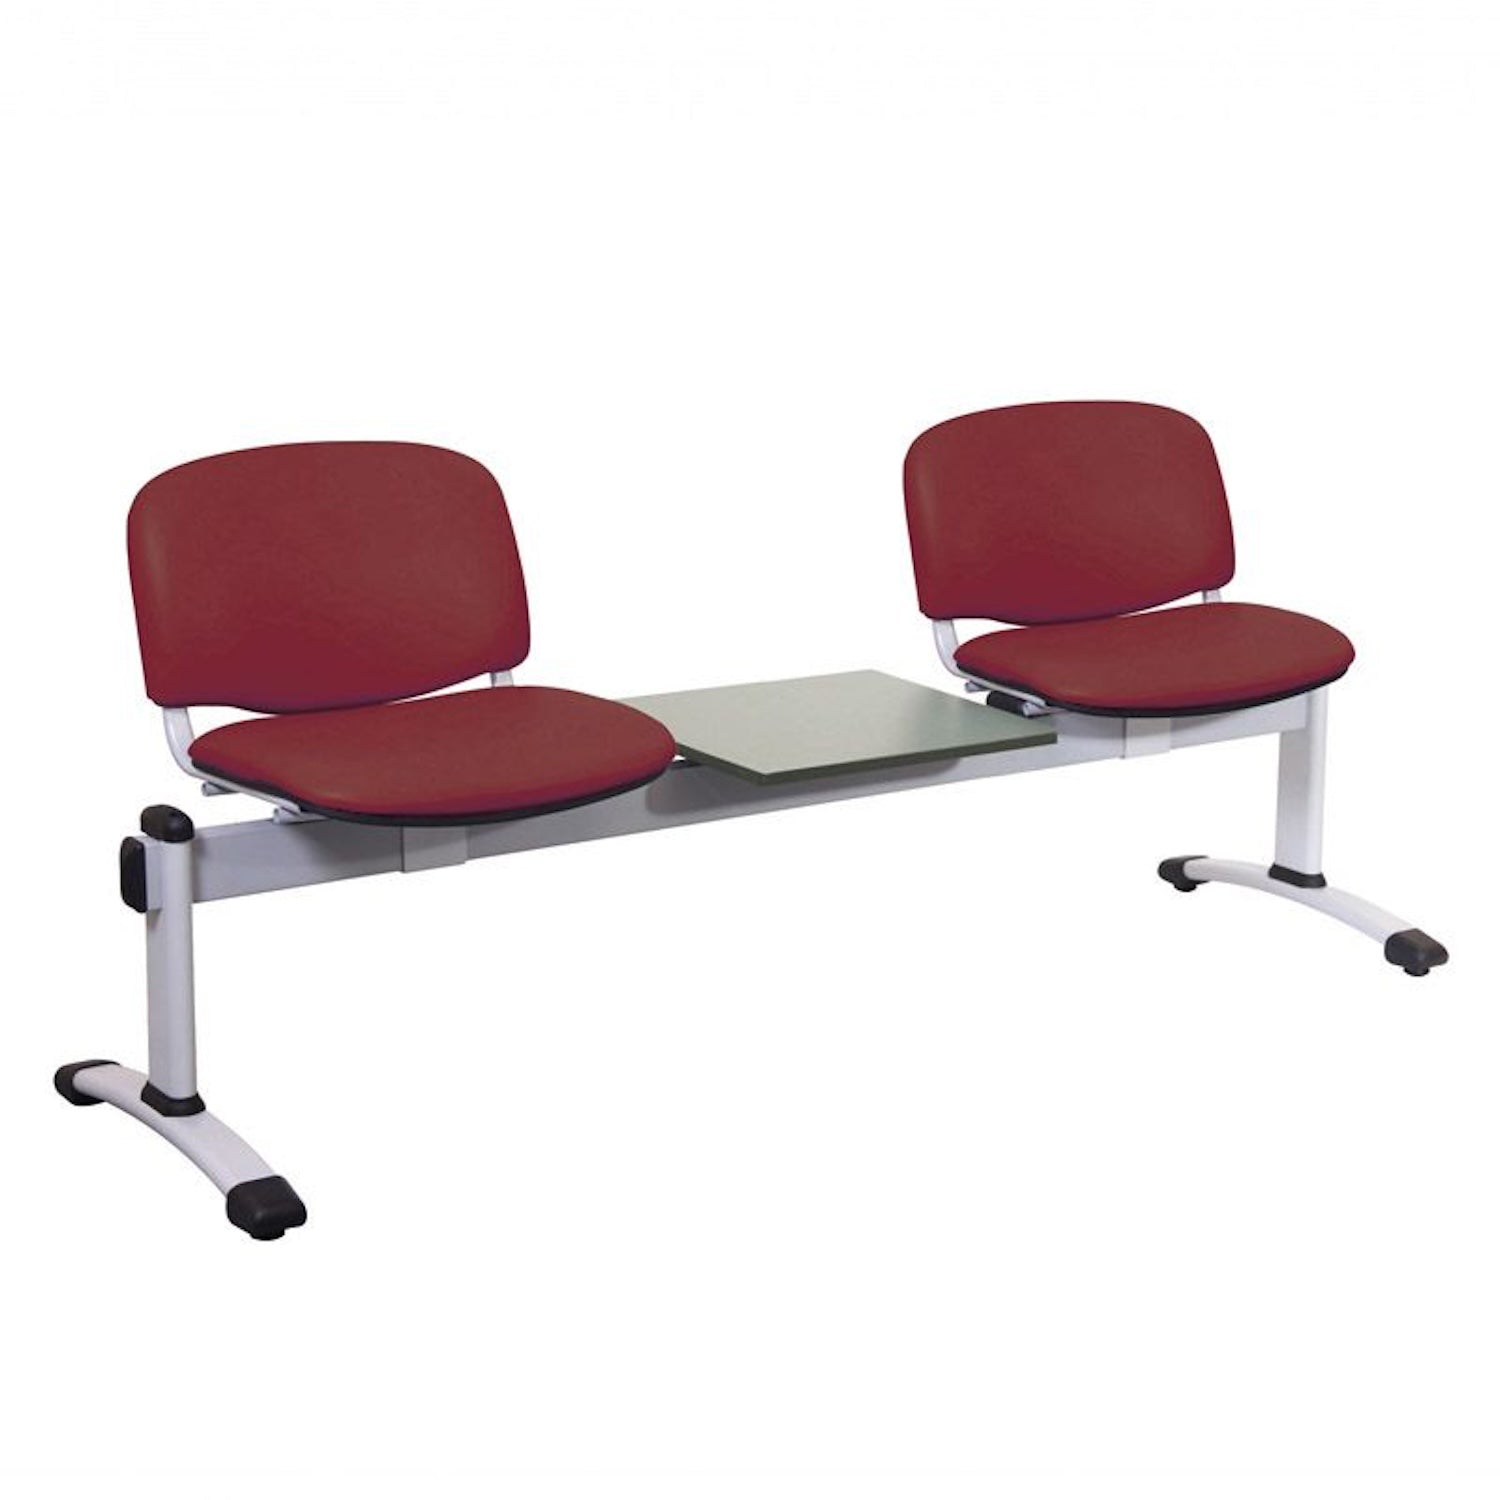 Sunflower Visitor 2 Anti-bacterial Vinyl Upholstery Seats & 1 Table Module in Red Wine